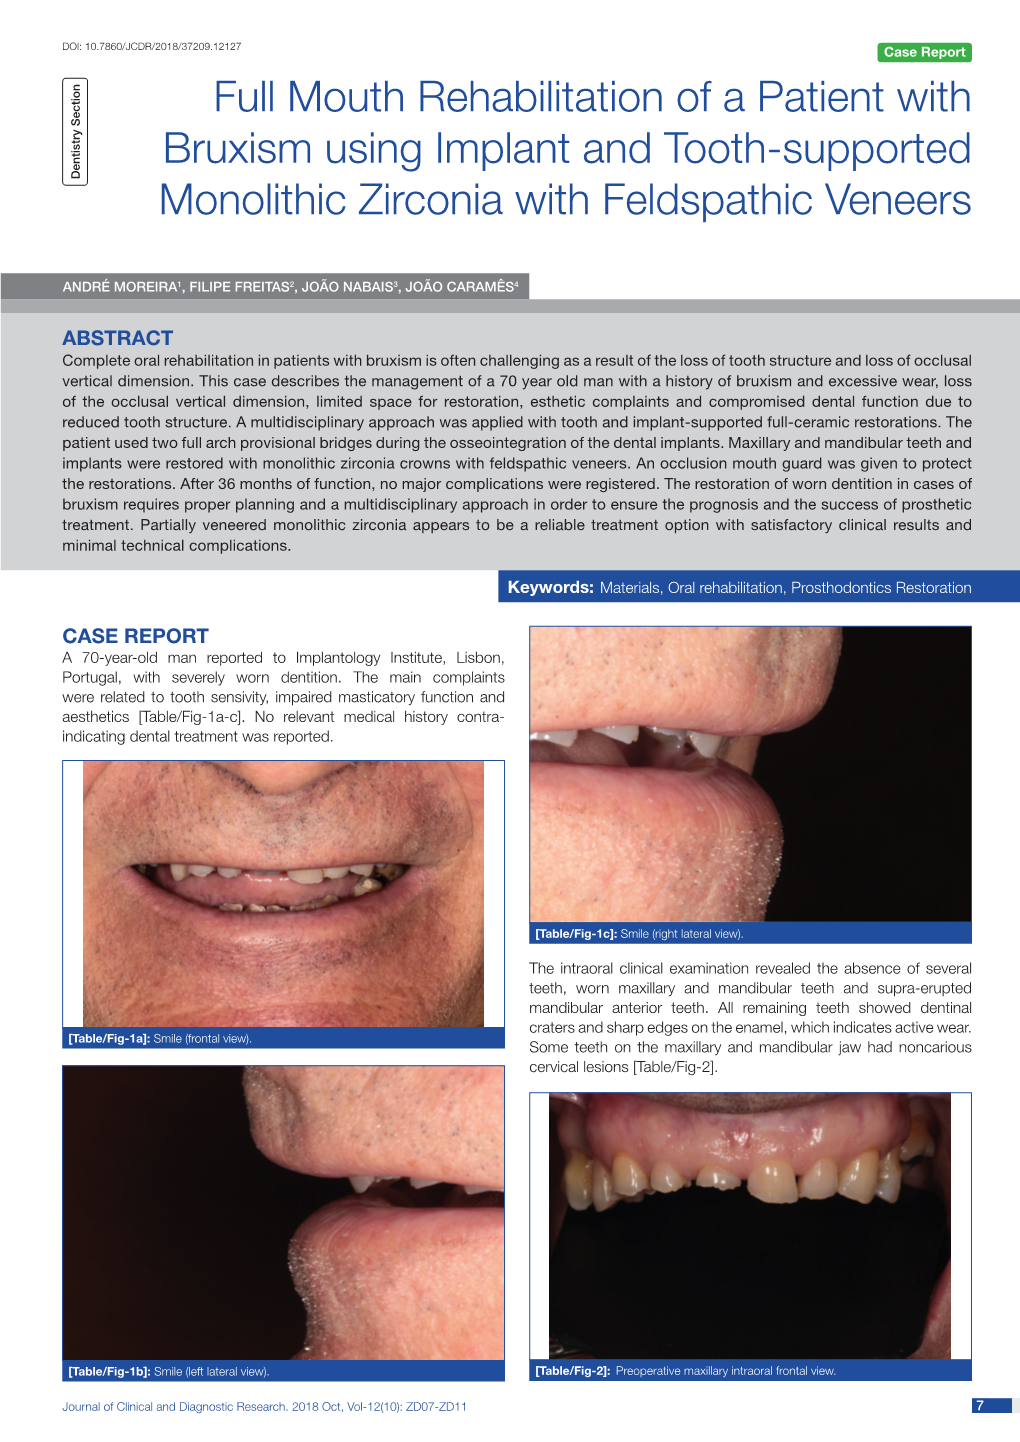 Full Mouth Rehabilitation of a Patient with Bruxism Using Implant and Tooth-Supported Dentistry Section Monolithic Zirconia with Feldspathic Veneers